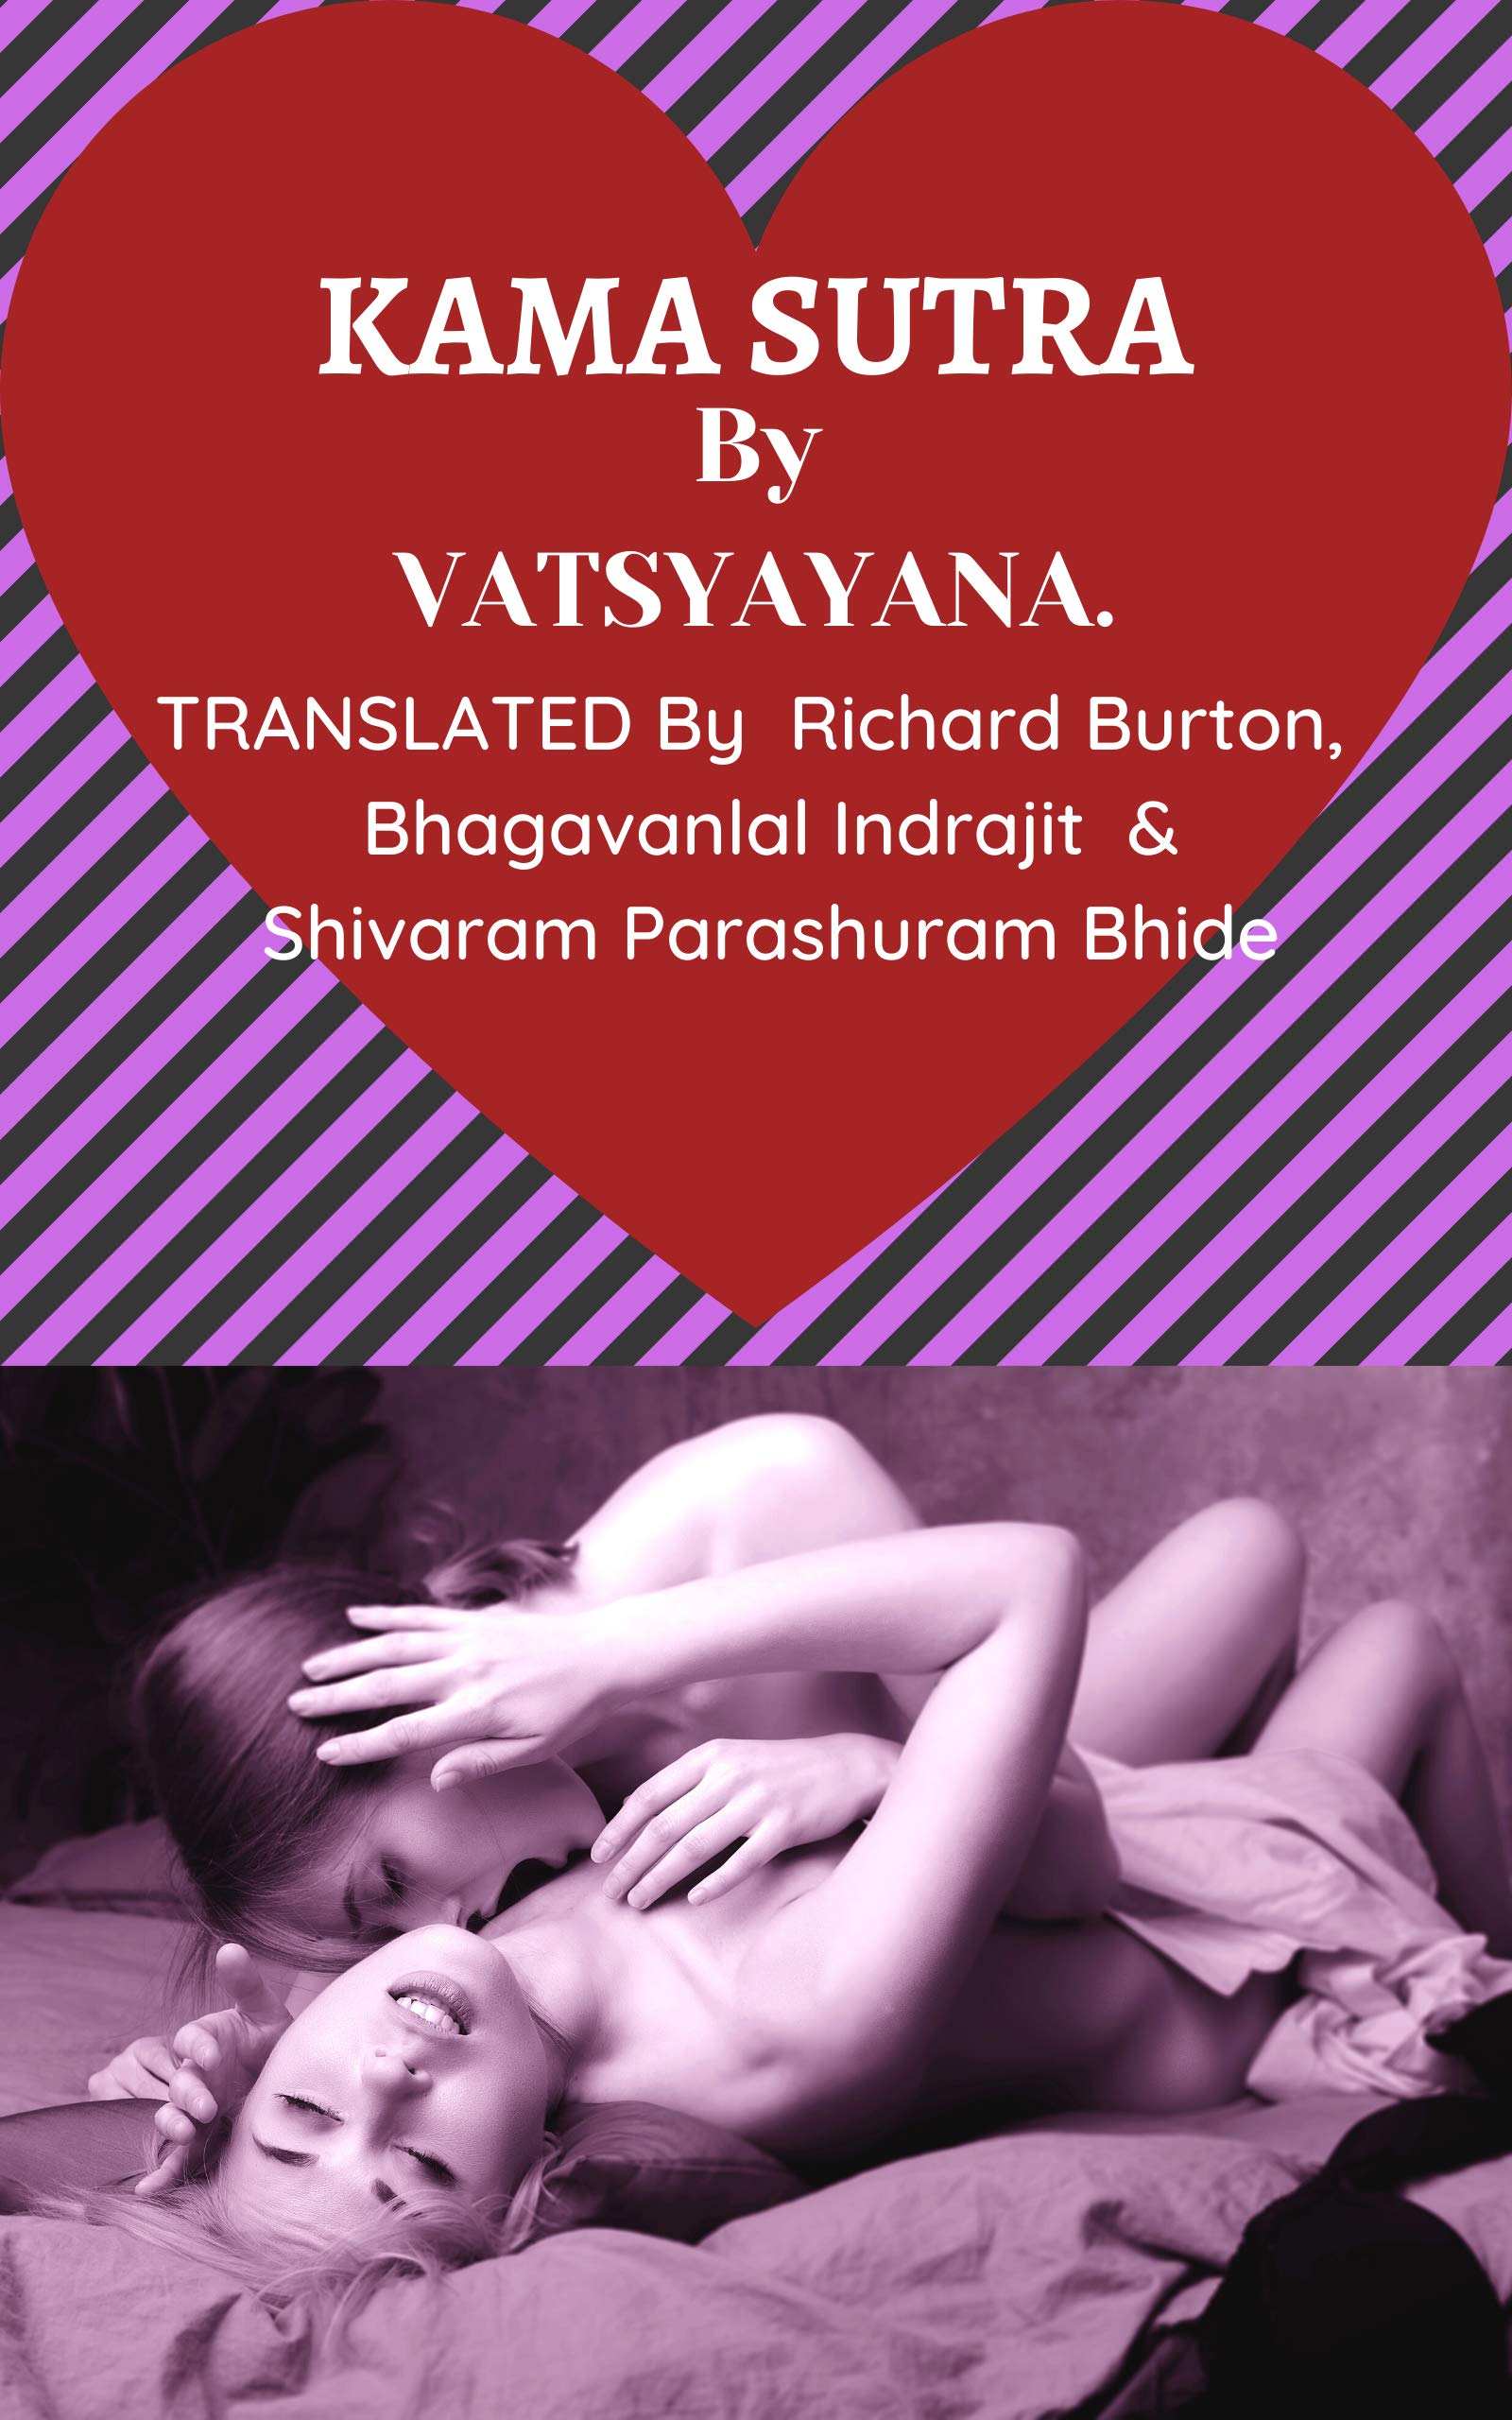 benjamin bolton recommends kamasutra book summary with pictures pdf pic